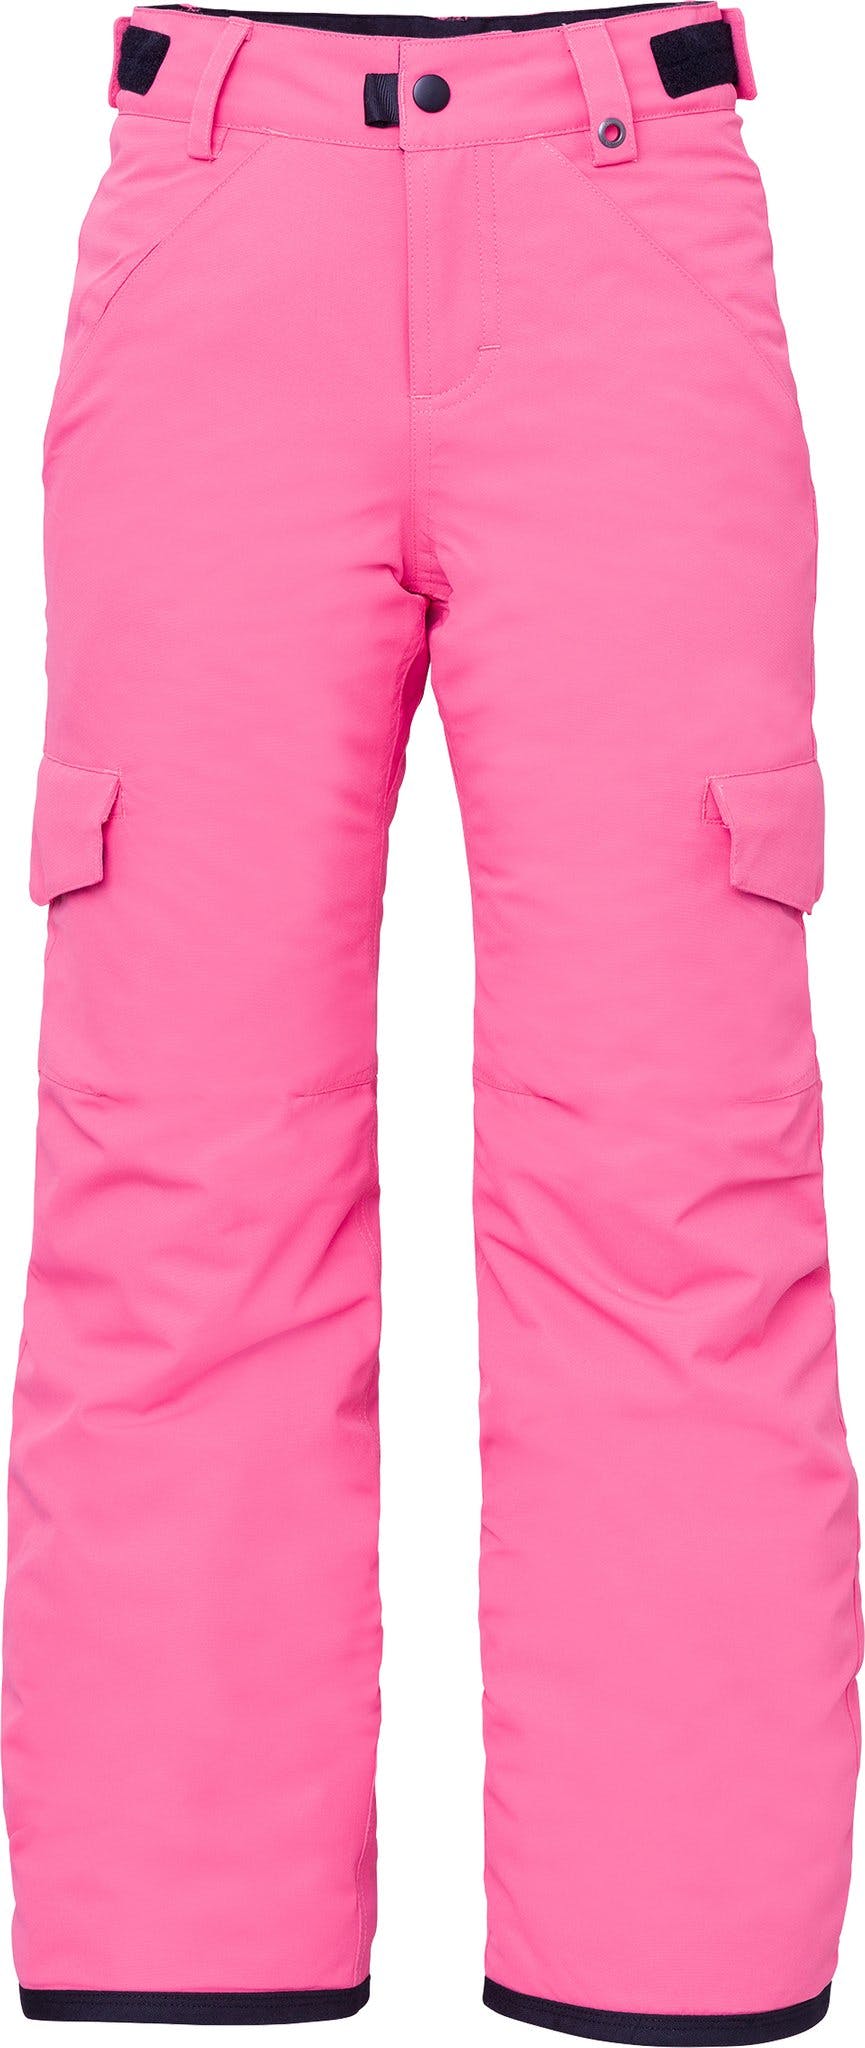 Product image for Lola Insulated Pant - Girl